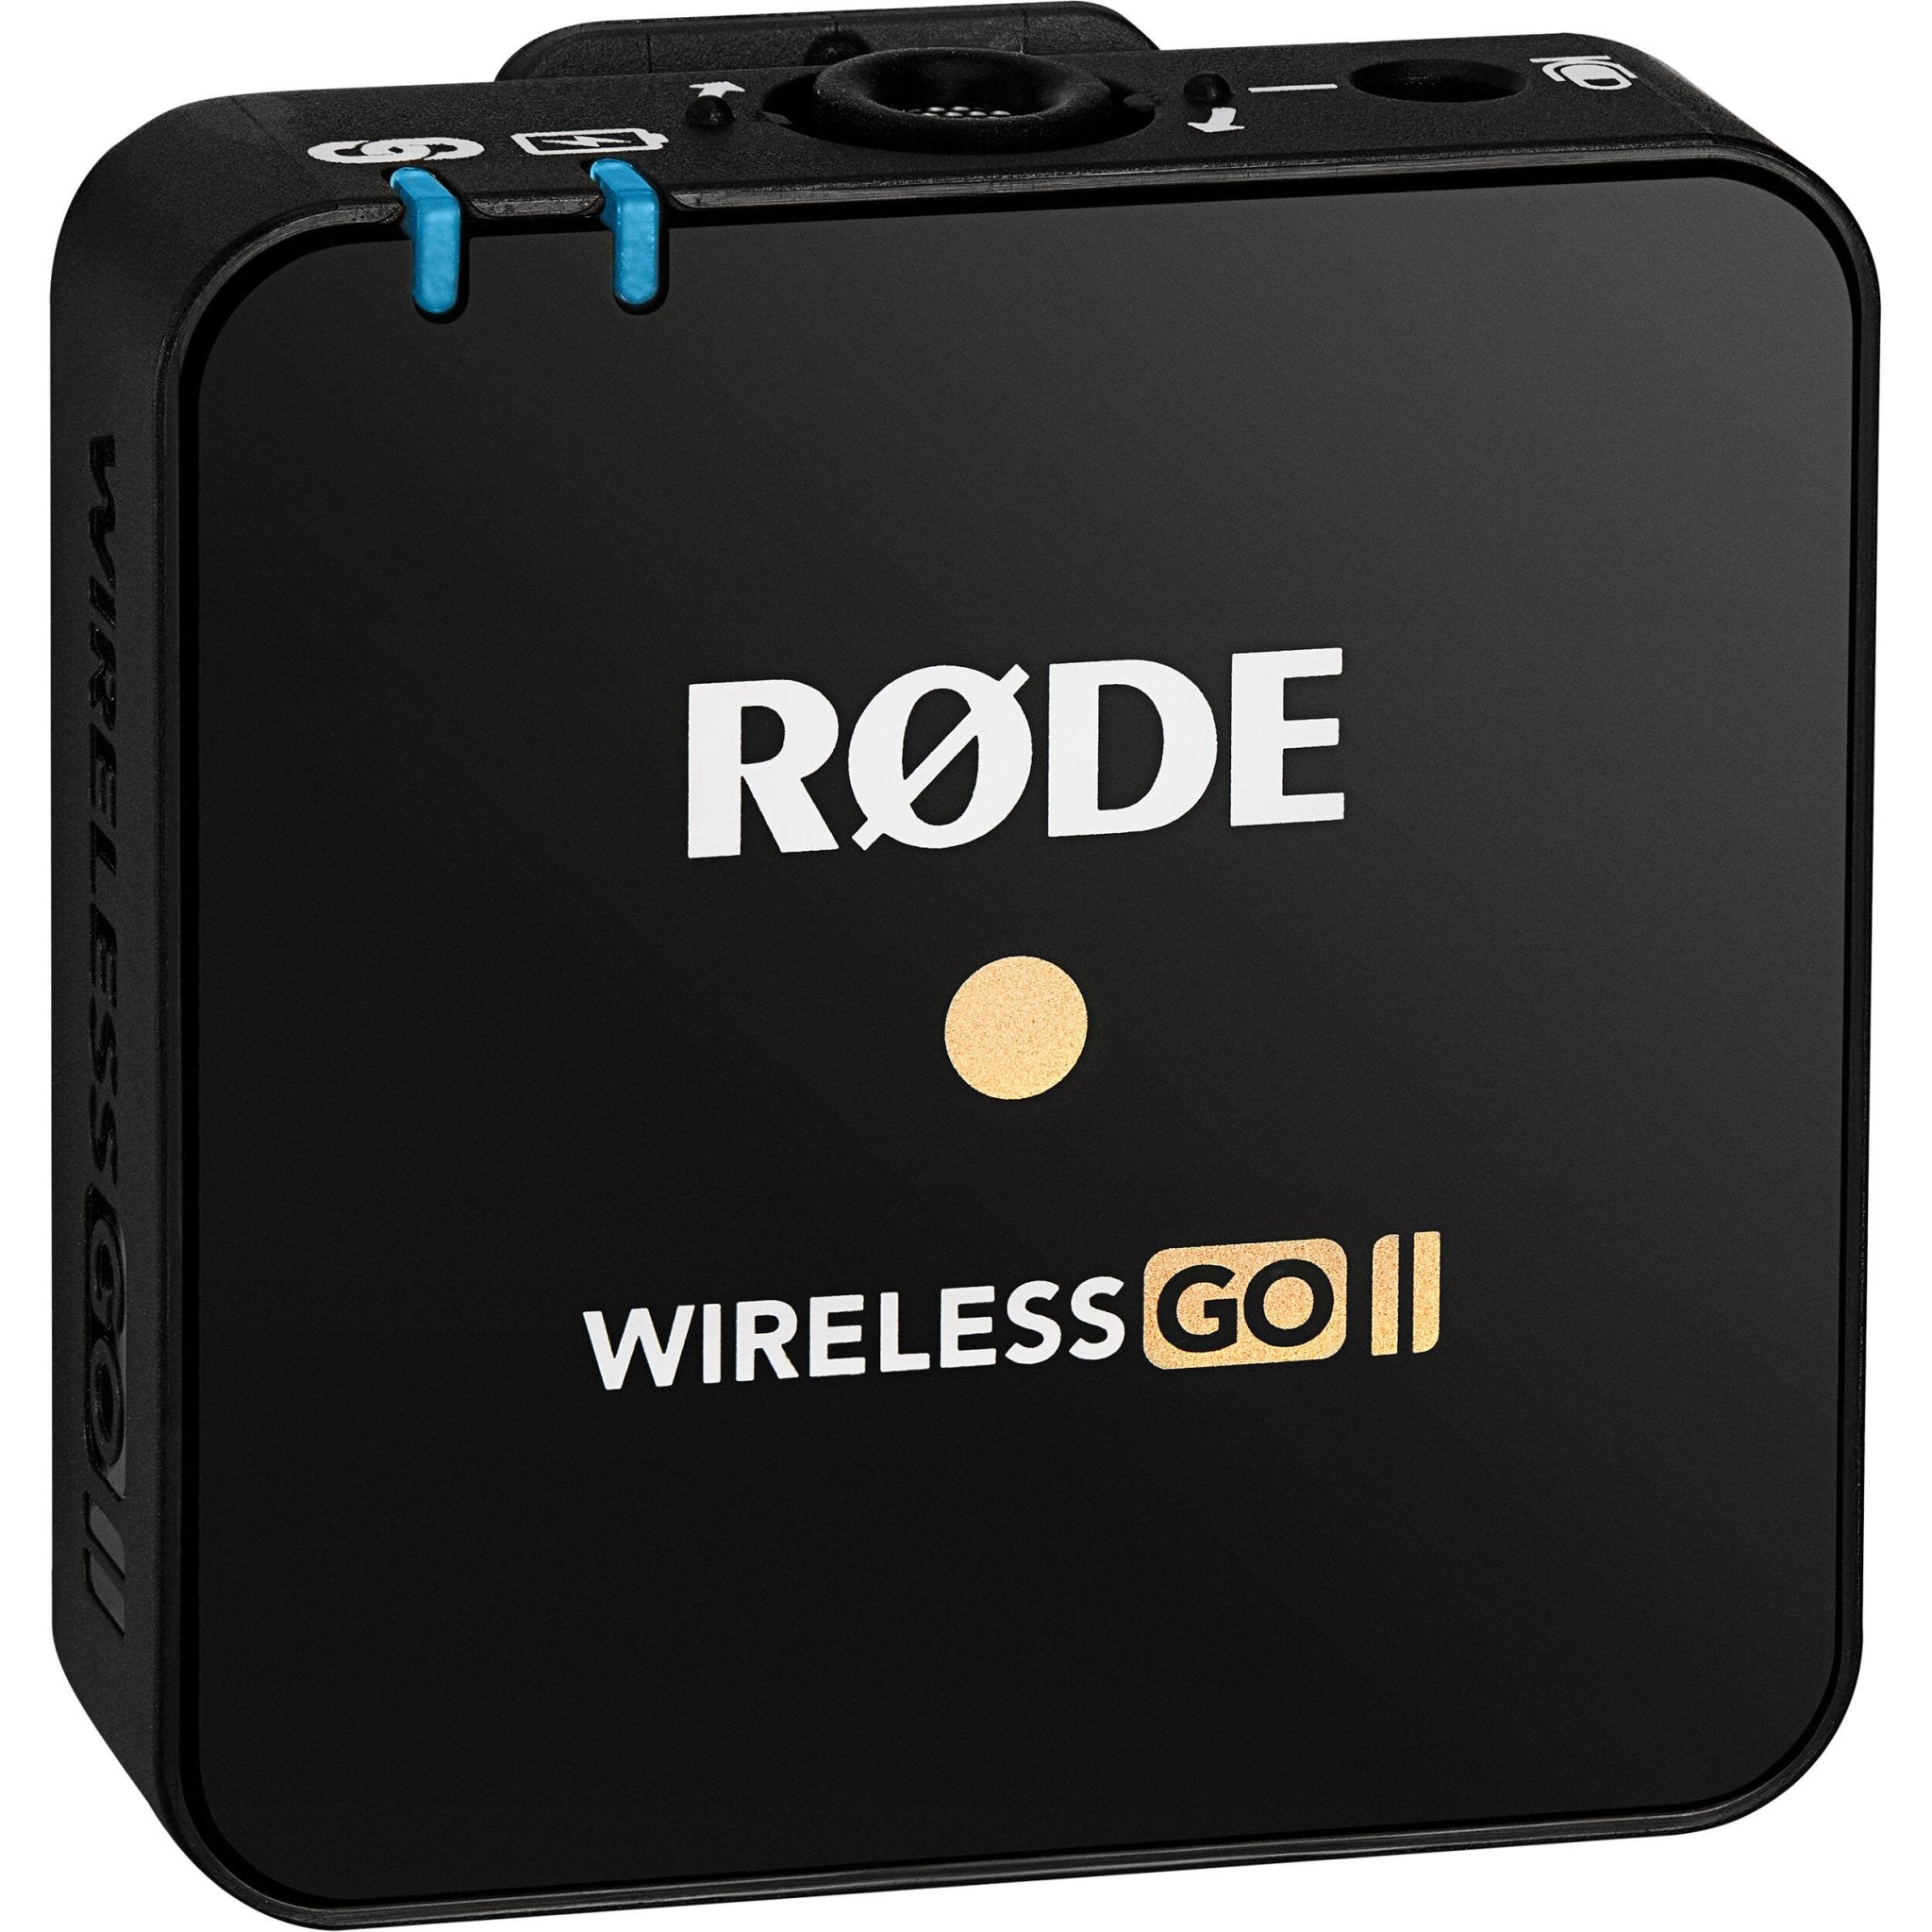 The RODE Wireless Pro Is RODE's Most Powerful Wireless Microphone Yet